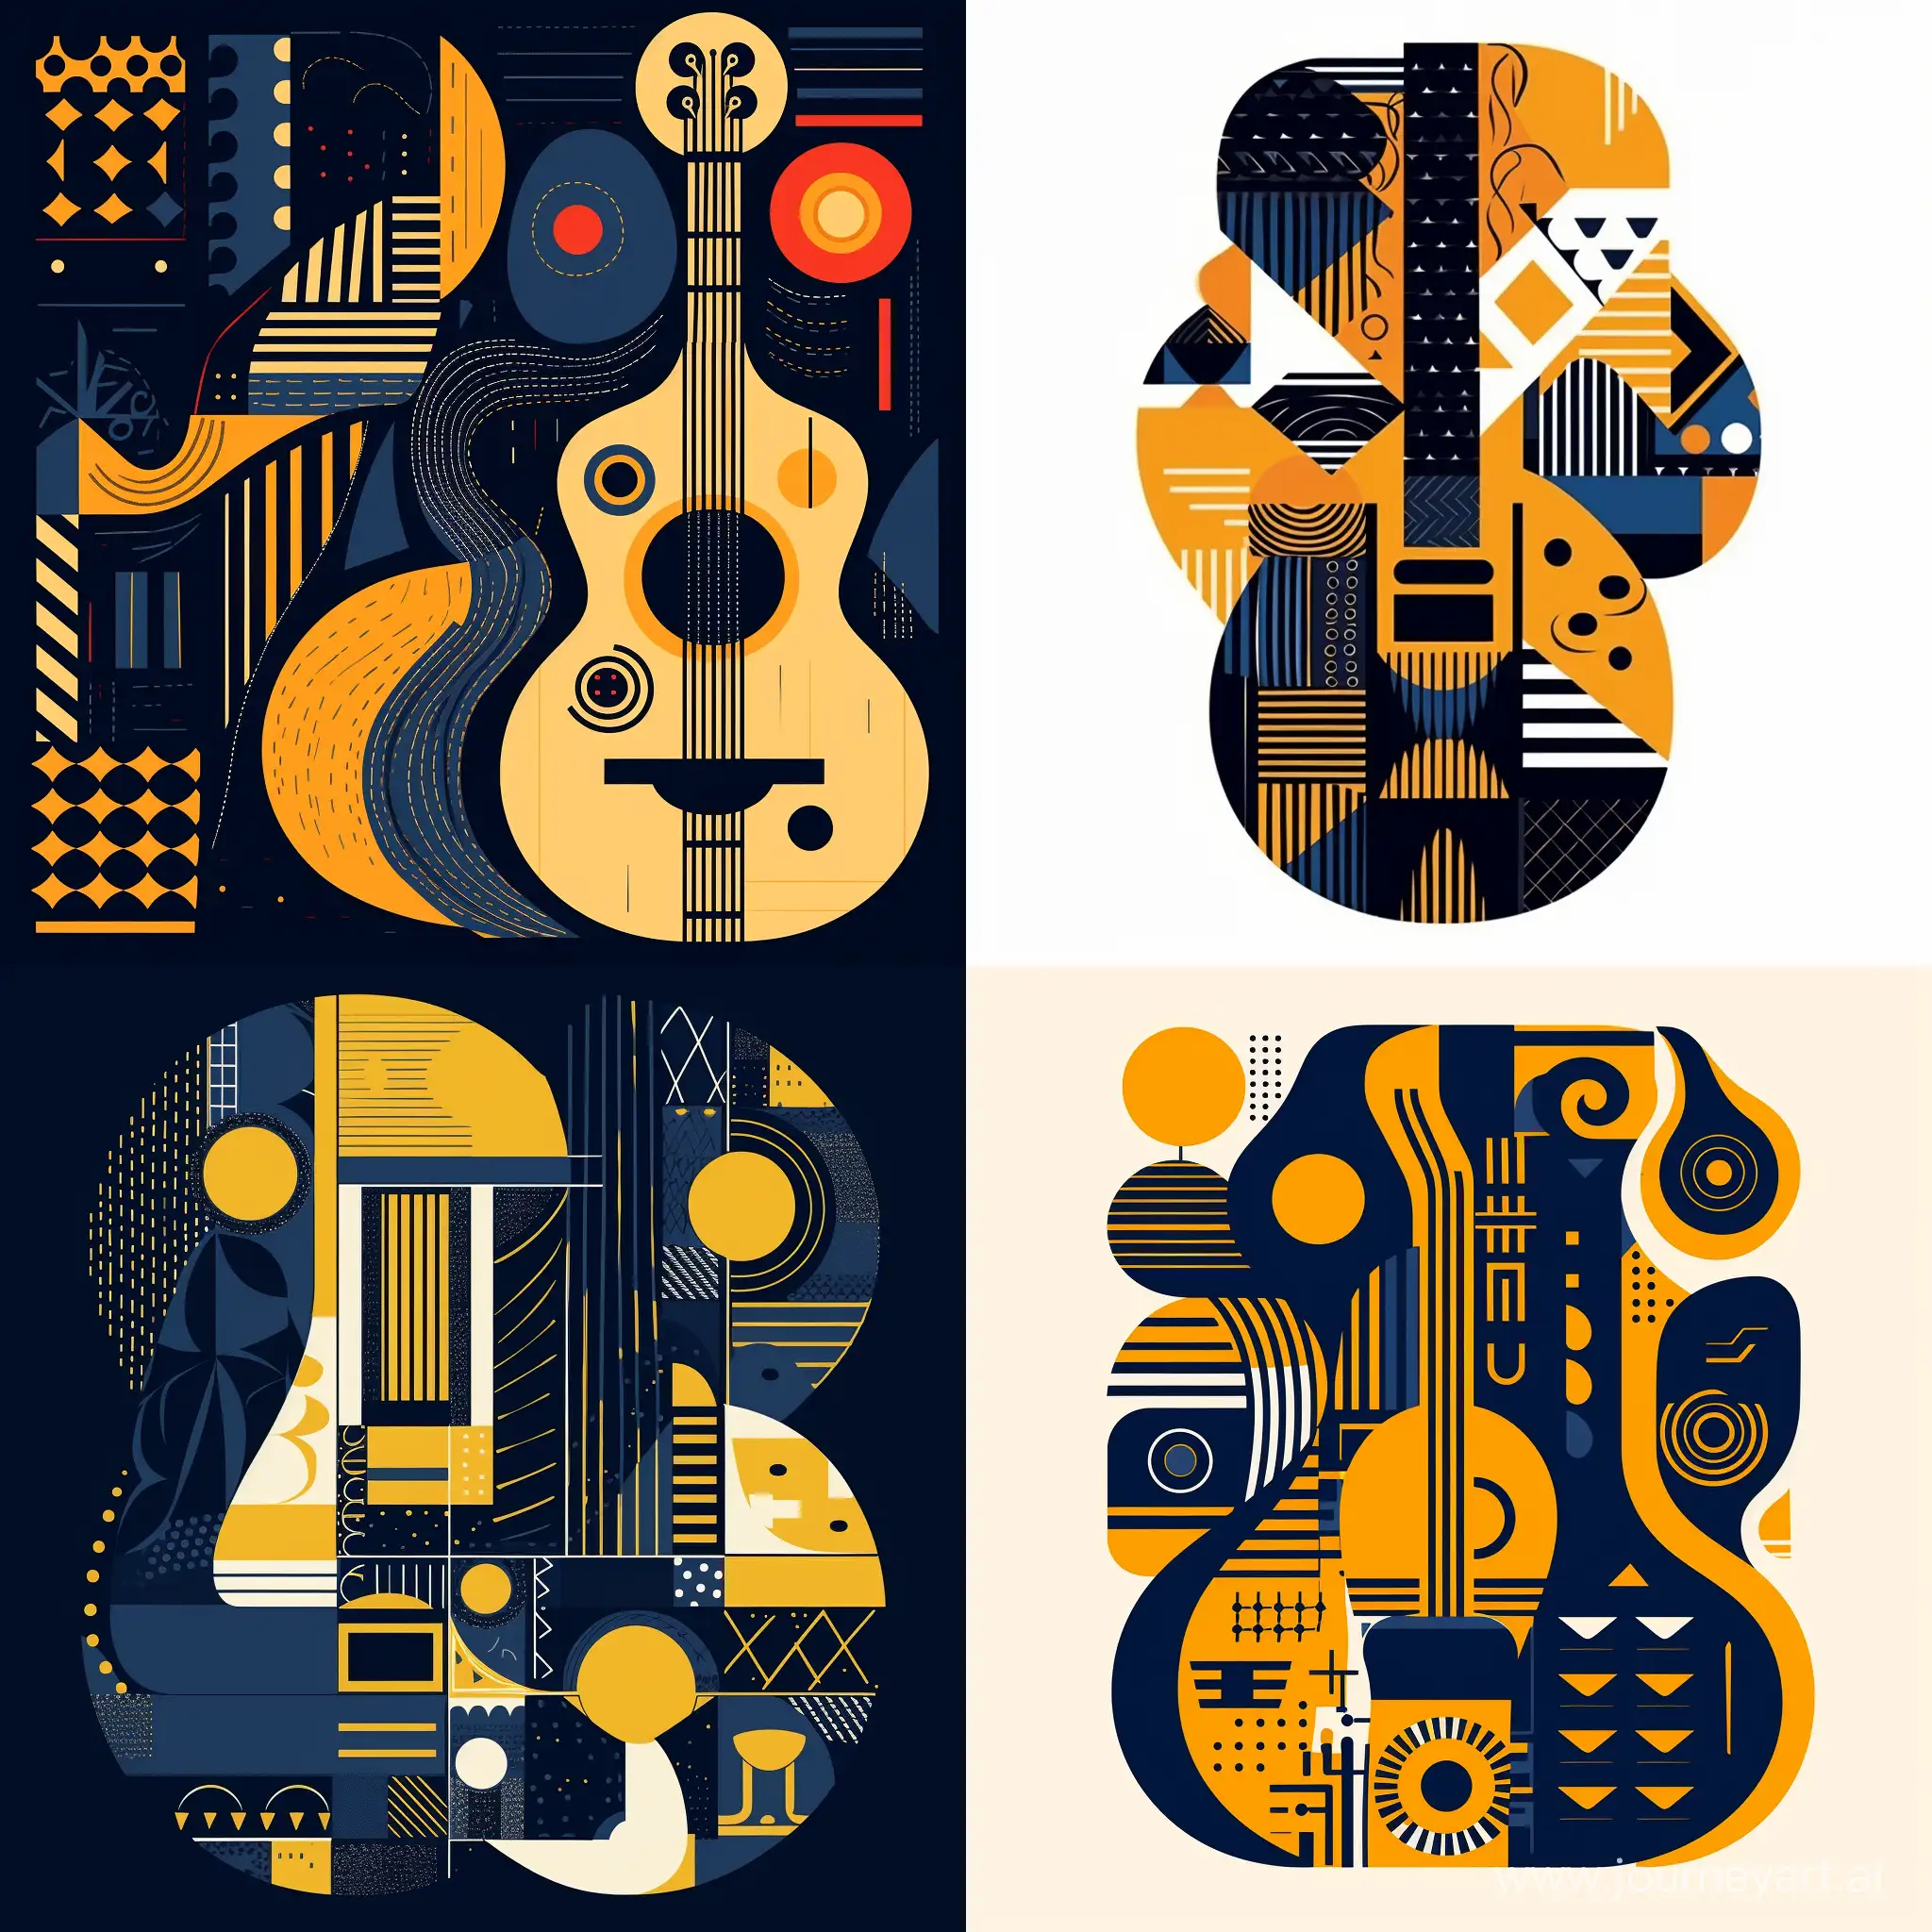 rough shape of an abstract design of a guitar with geometric elements on it, in the style of African patterns, illustration, layer stencil work, patterned background, navy and yellow